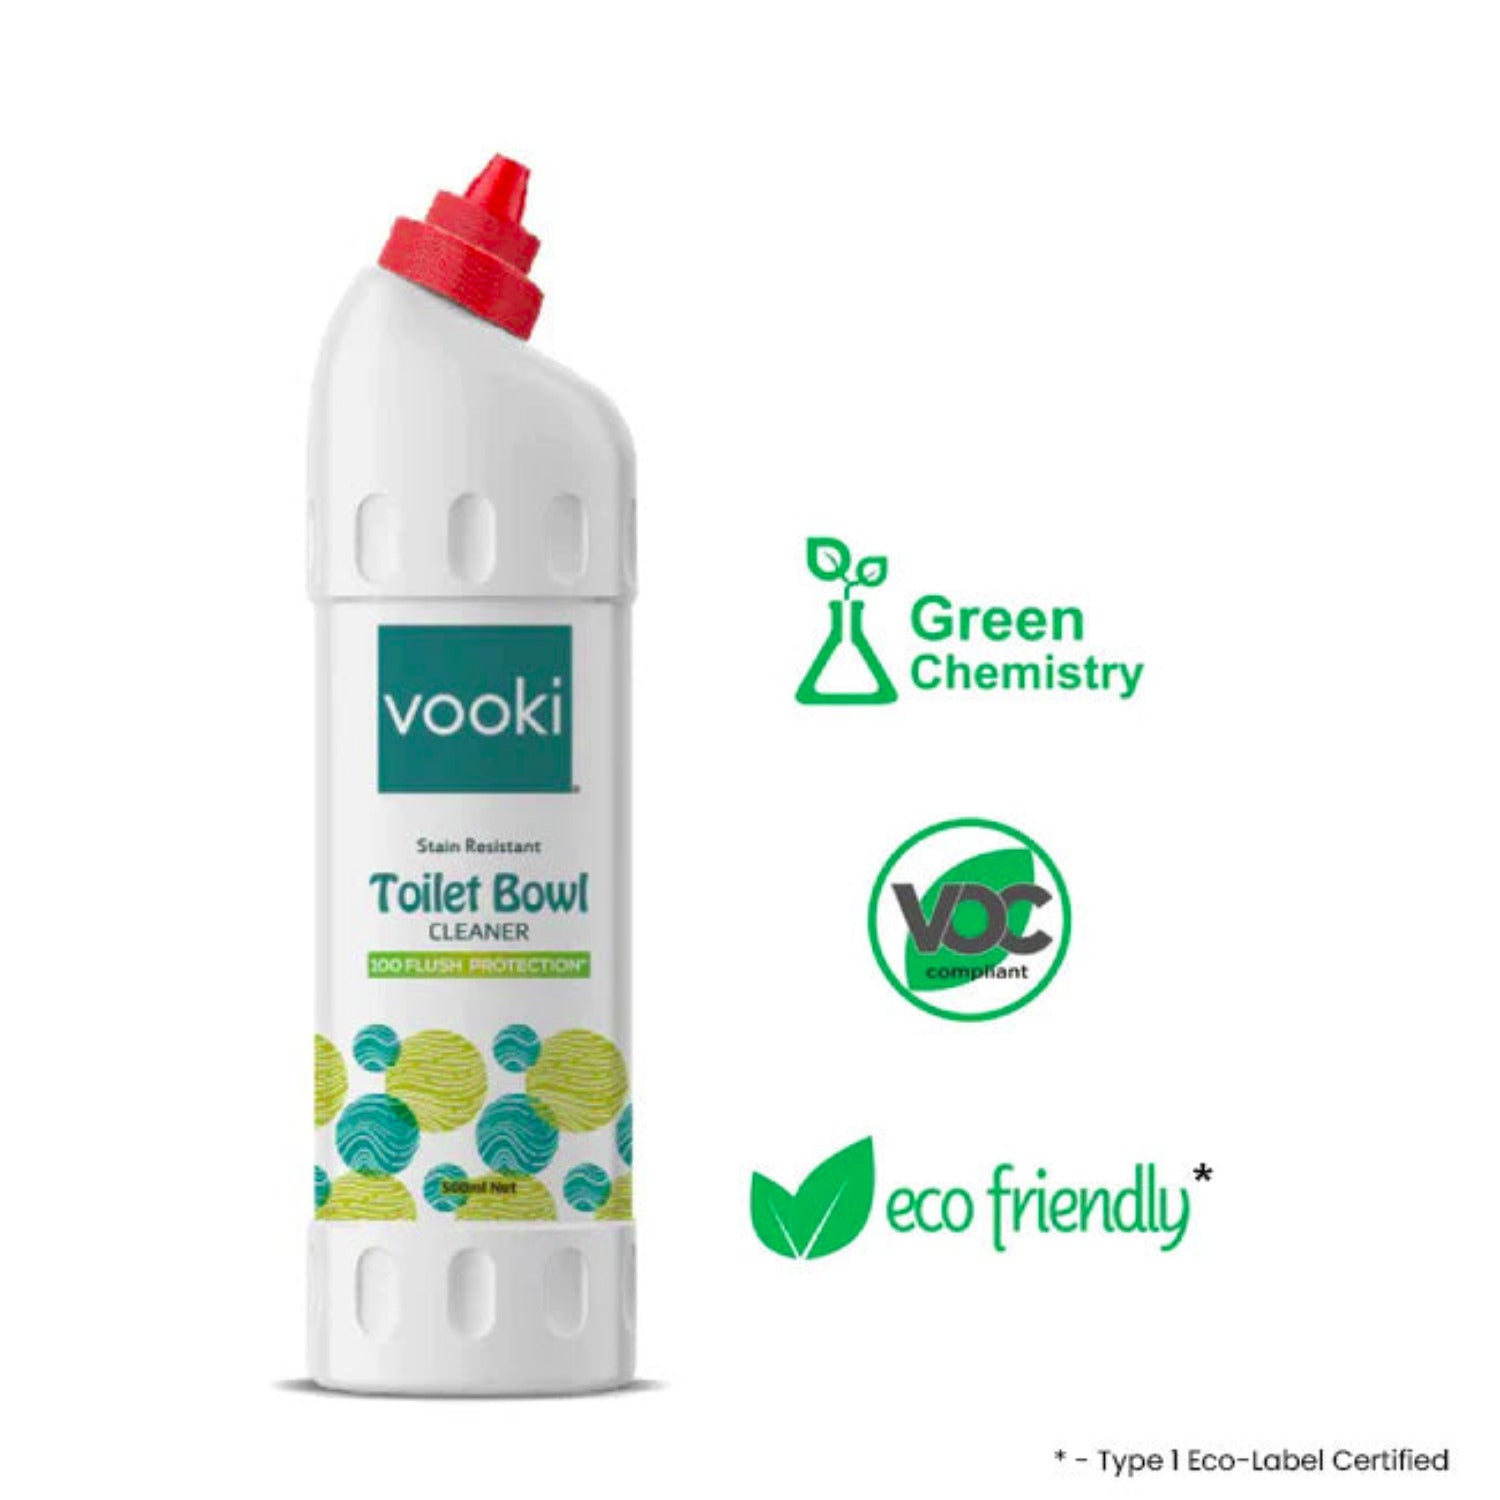 A bottle of vooki toilet bowl cleaner, designed to effectively clean and freshen your toilet.